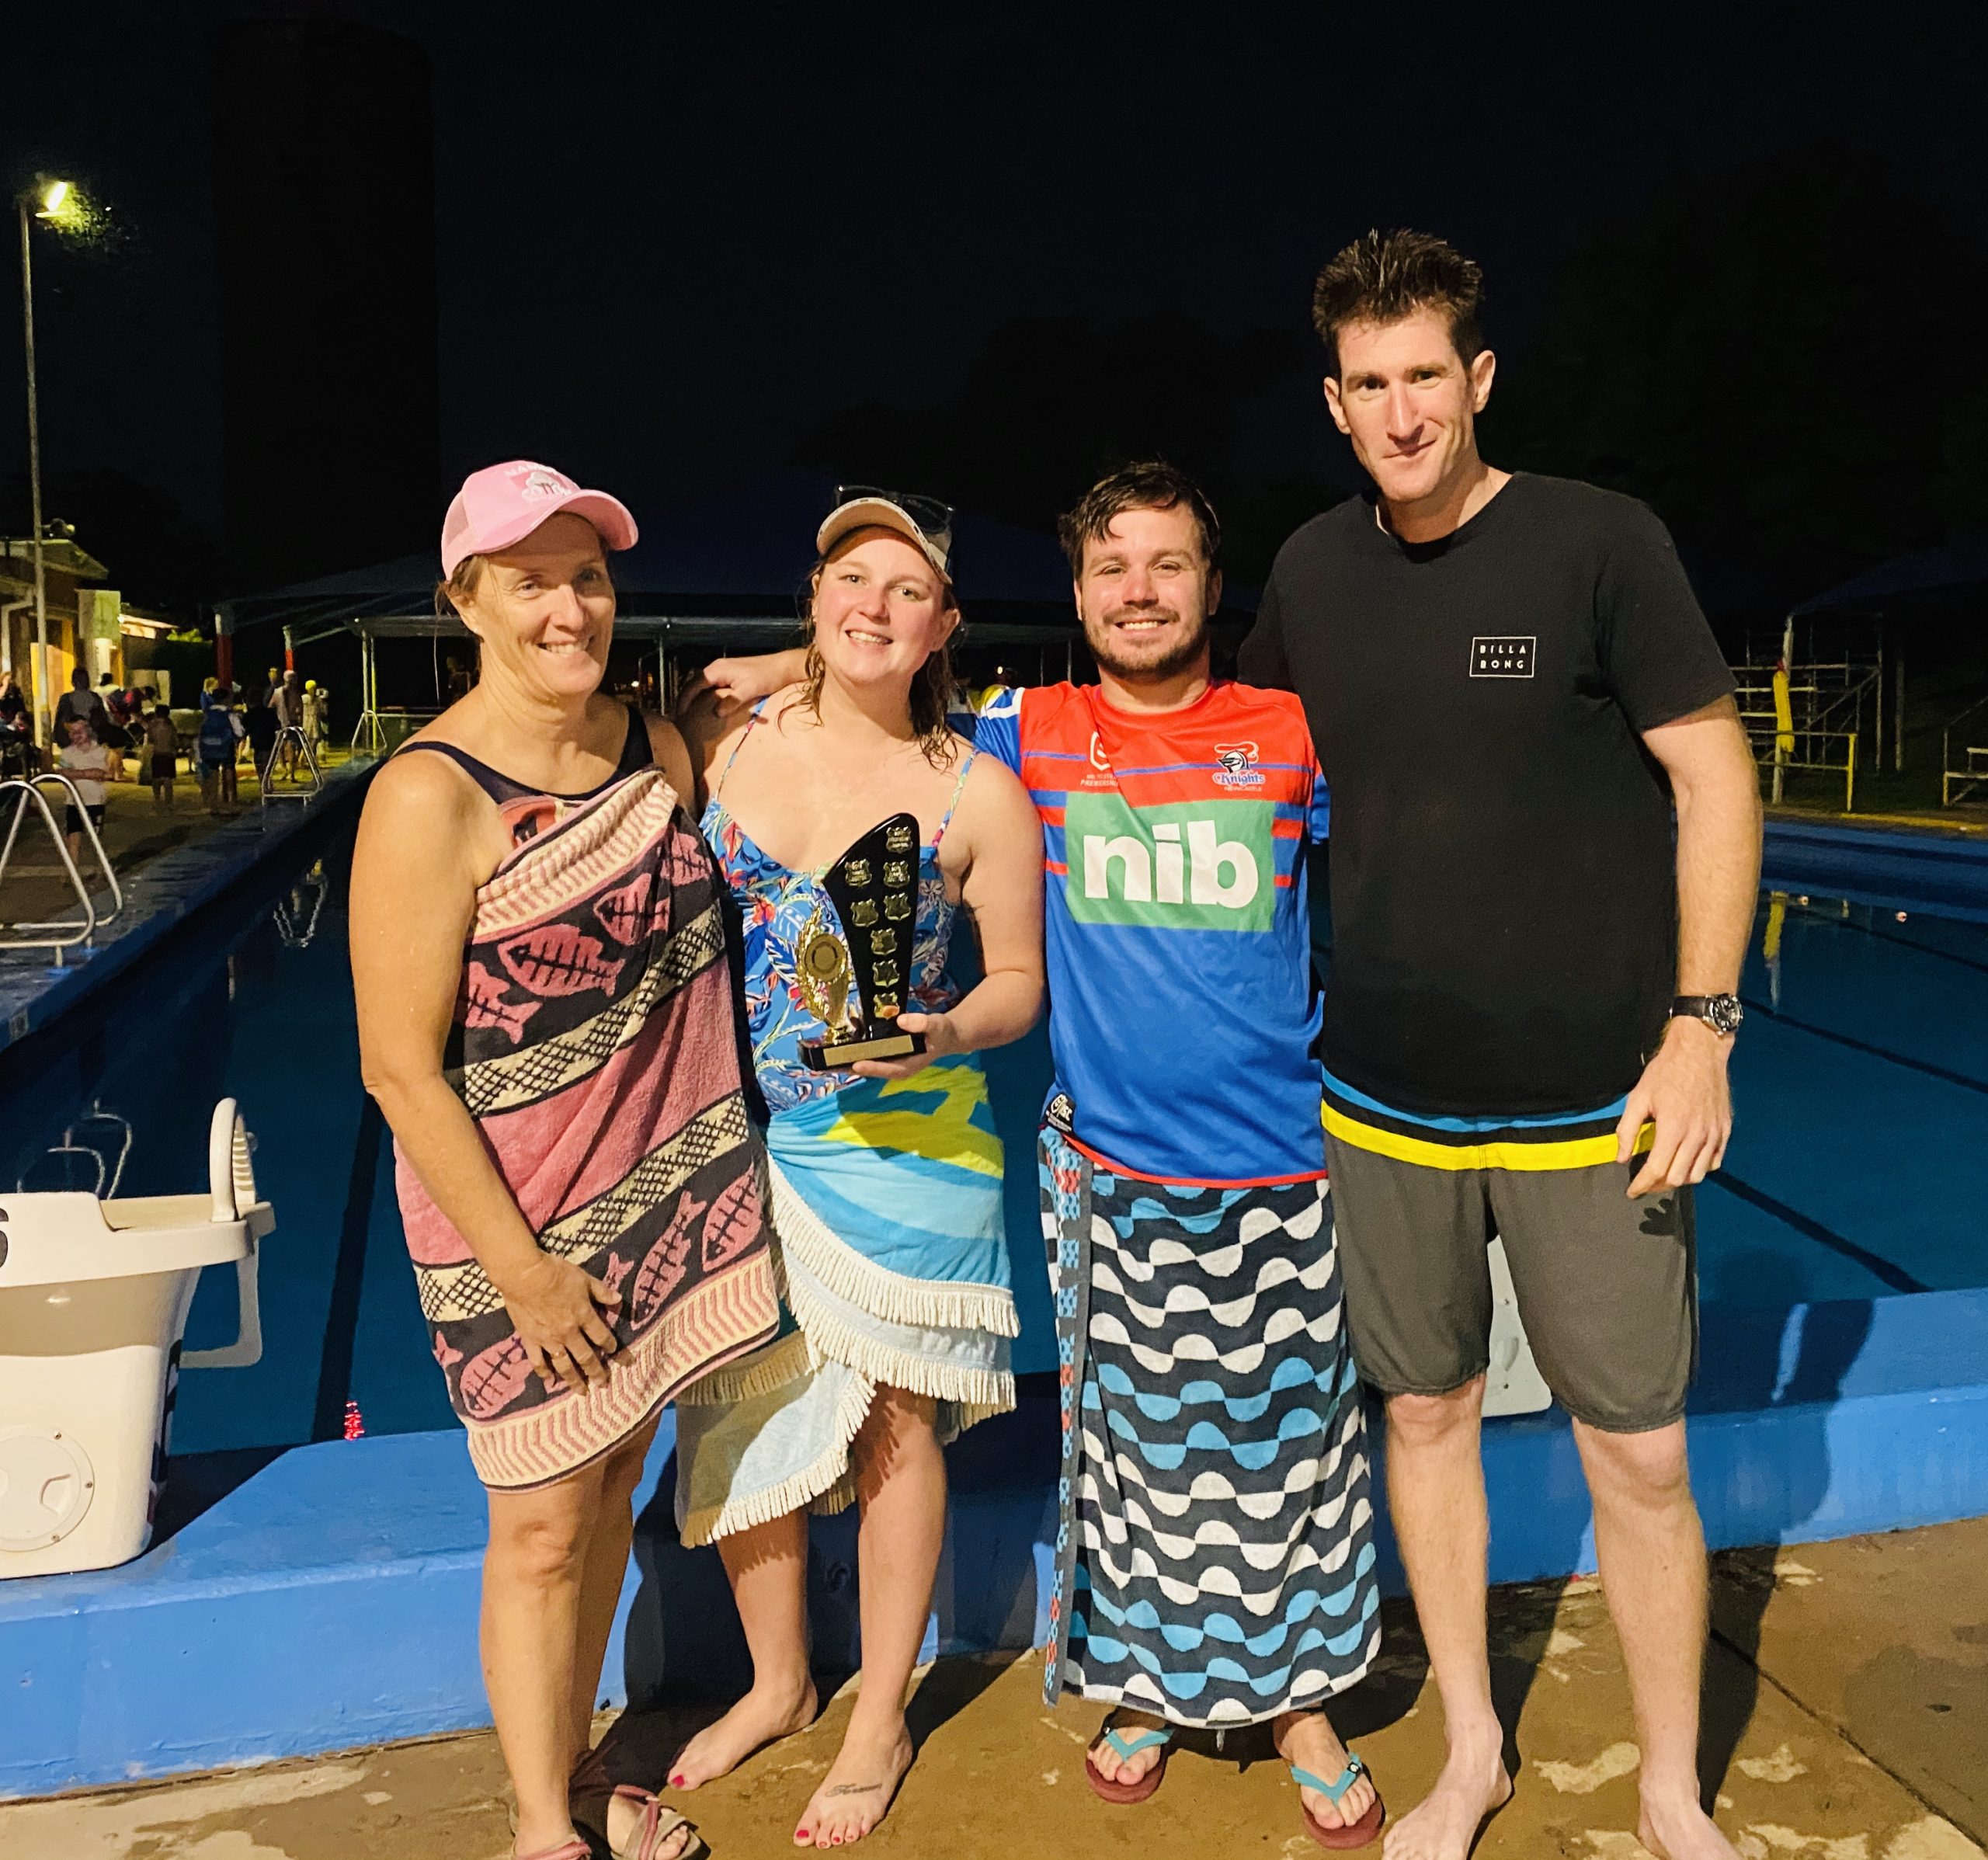 Wee Waa High School teachers claimed victory for the second year running in the School’s Handicap race with swimmers Sharon Grellman, Jordan McCluskey, Andy Kiely and Trent Woolcott.